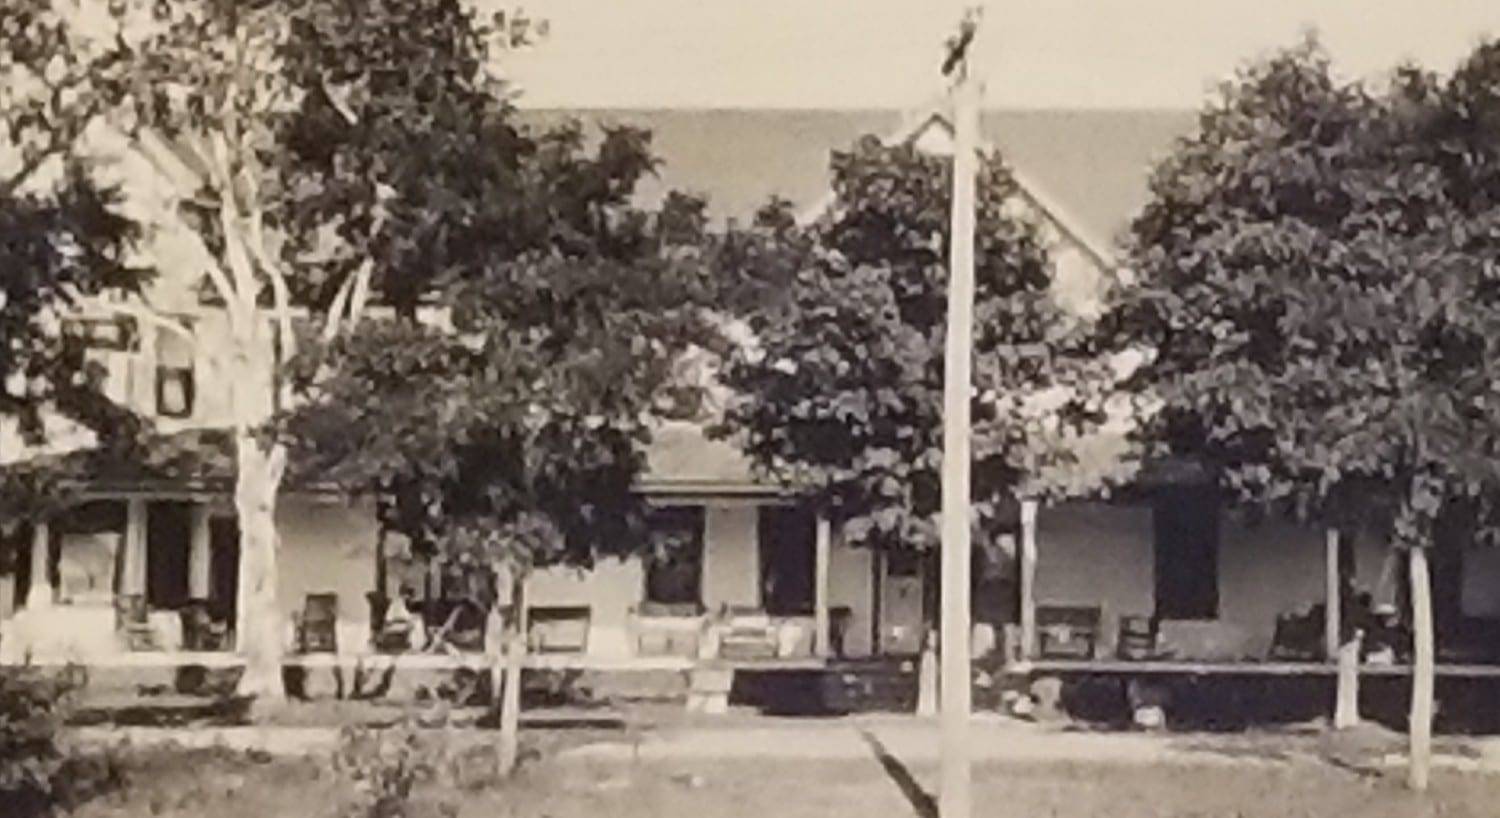 A black and white historic photograph of a hotel with large trees in front